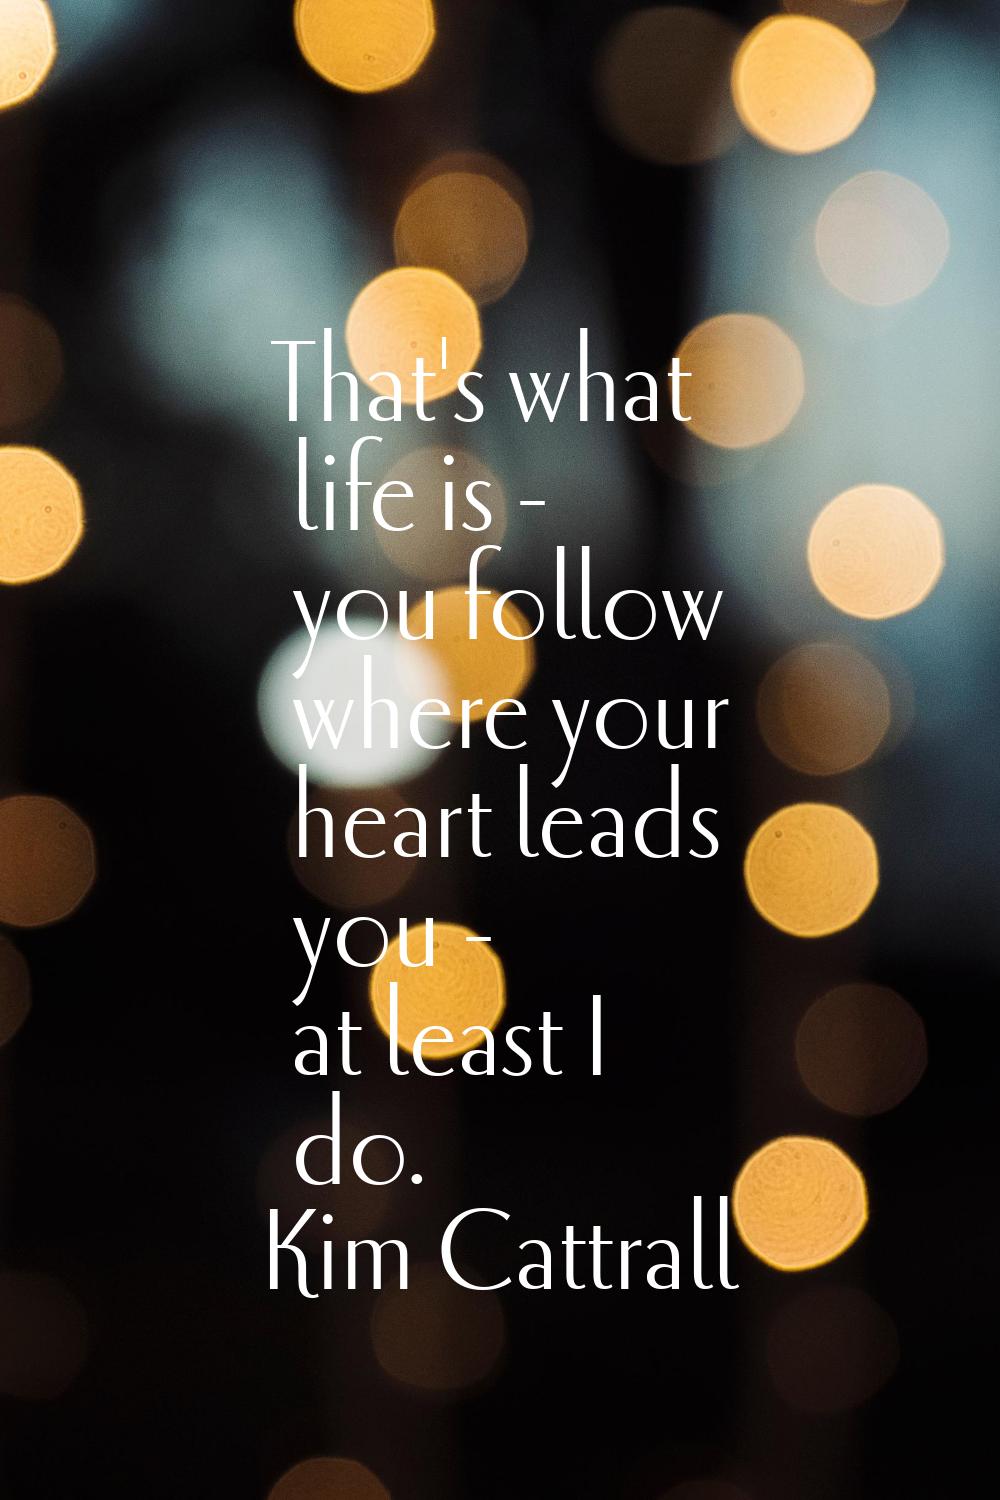 That's what life is - you follow where your heart leads you - at least I do.